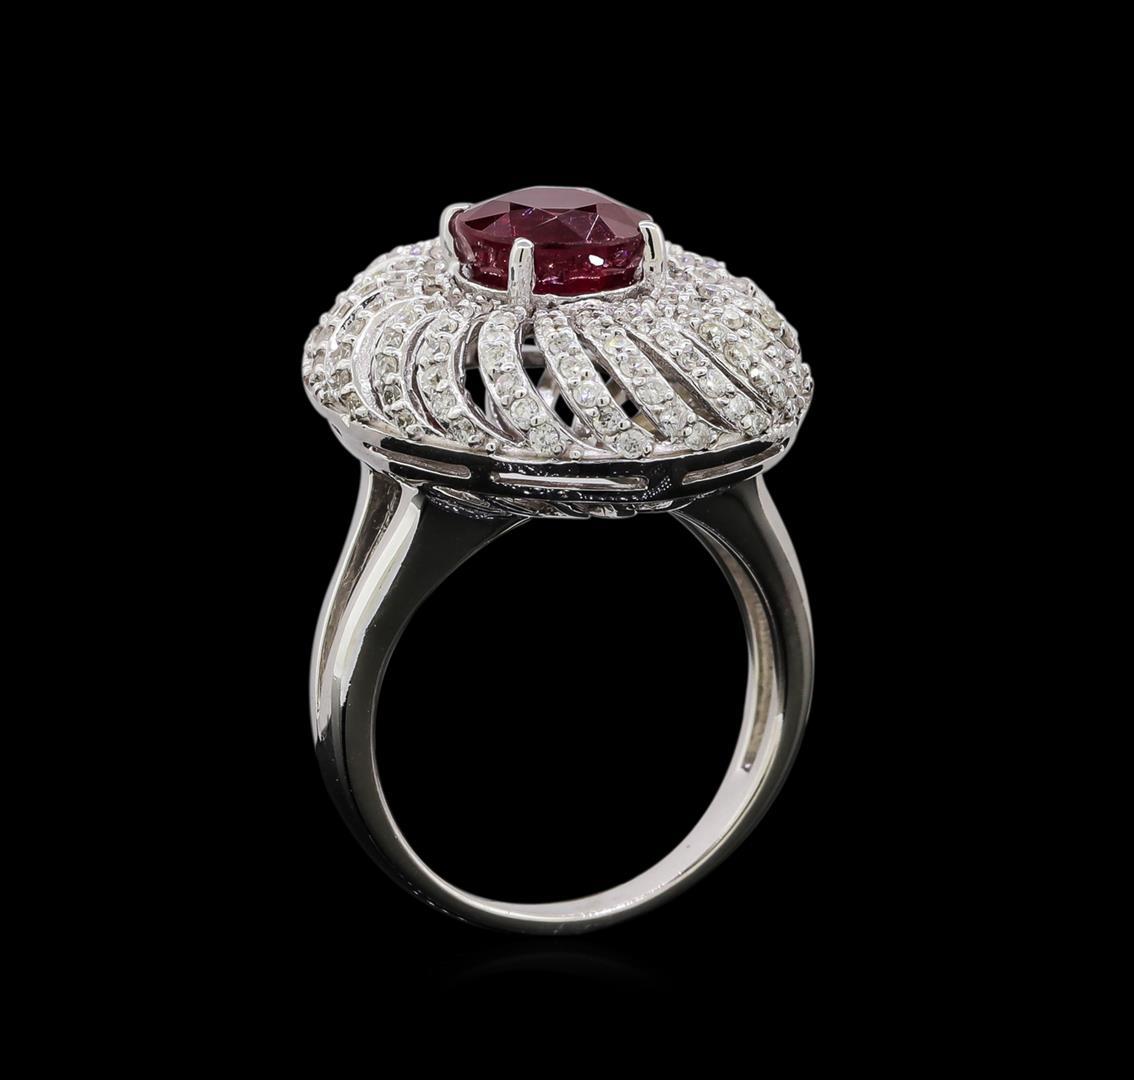 14KT White Gold 2.73 ctw Ruby and Diamond Ring